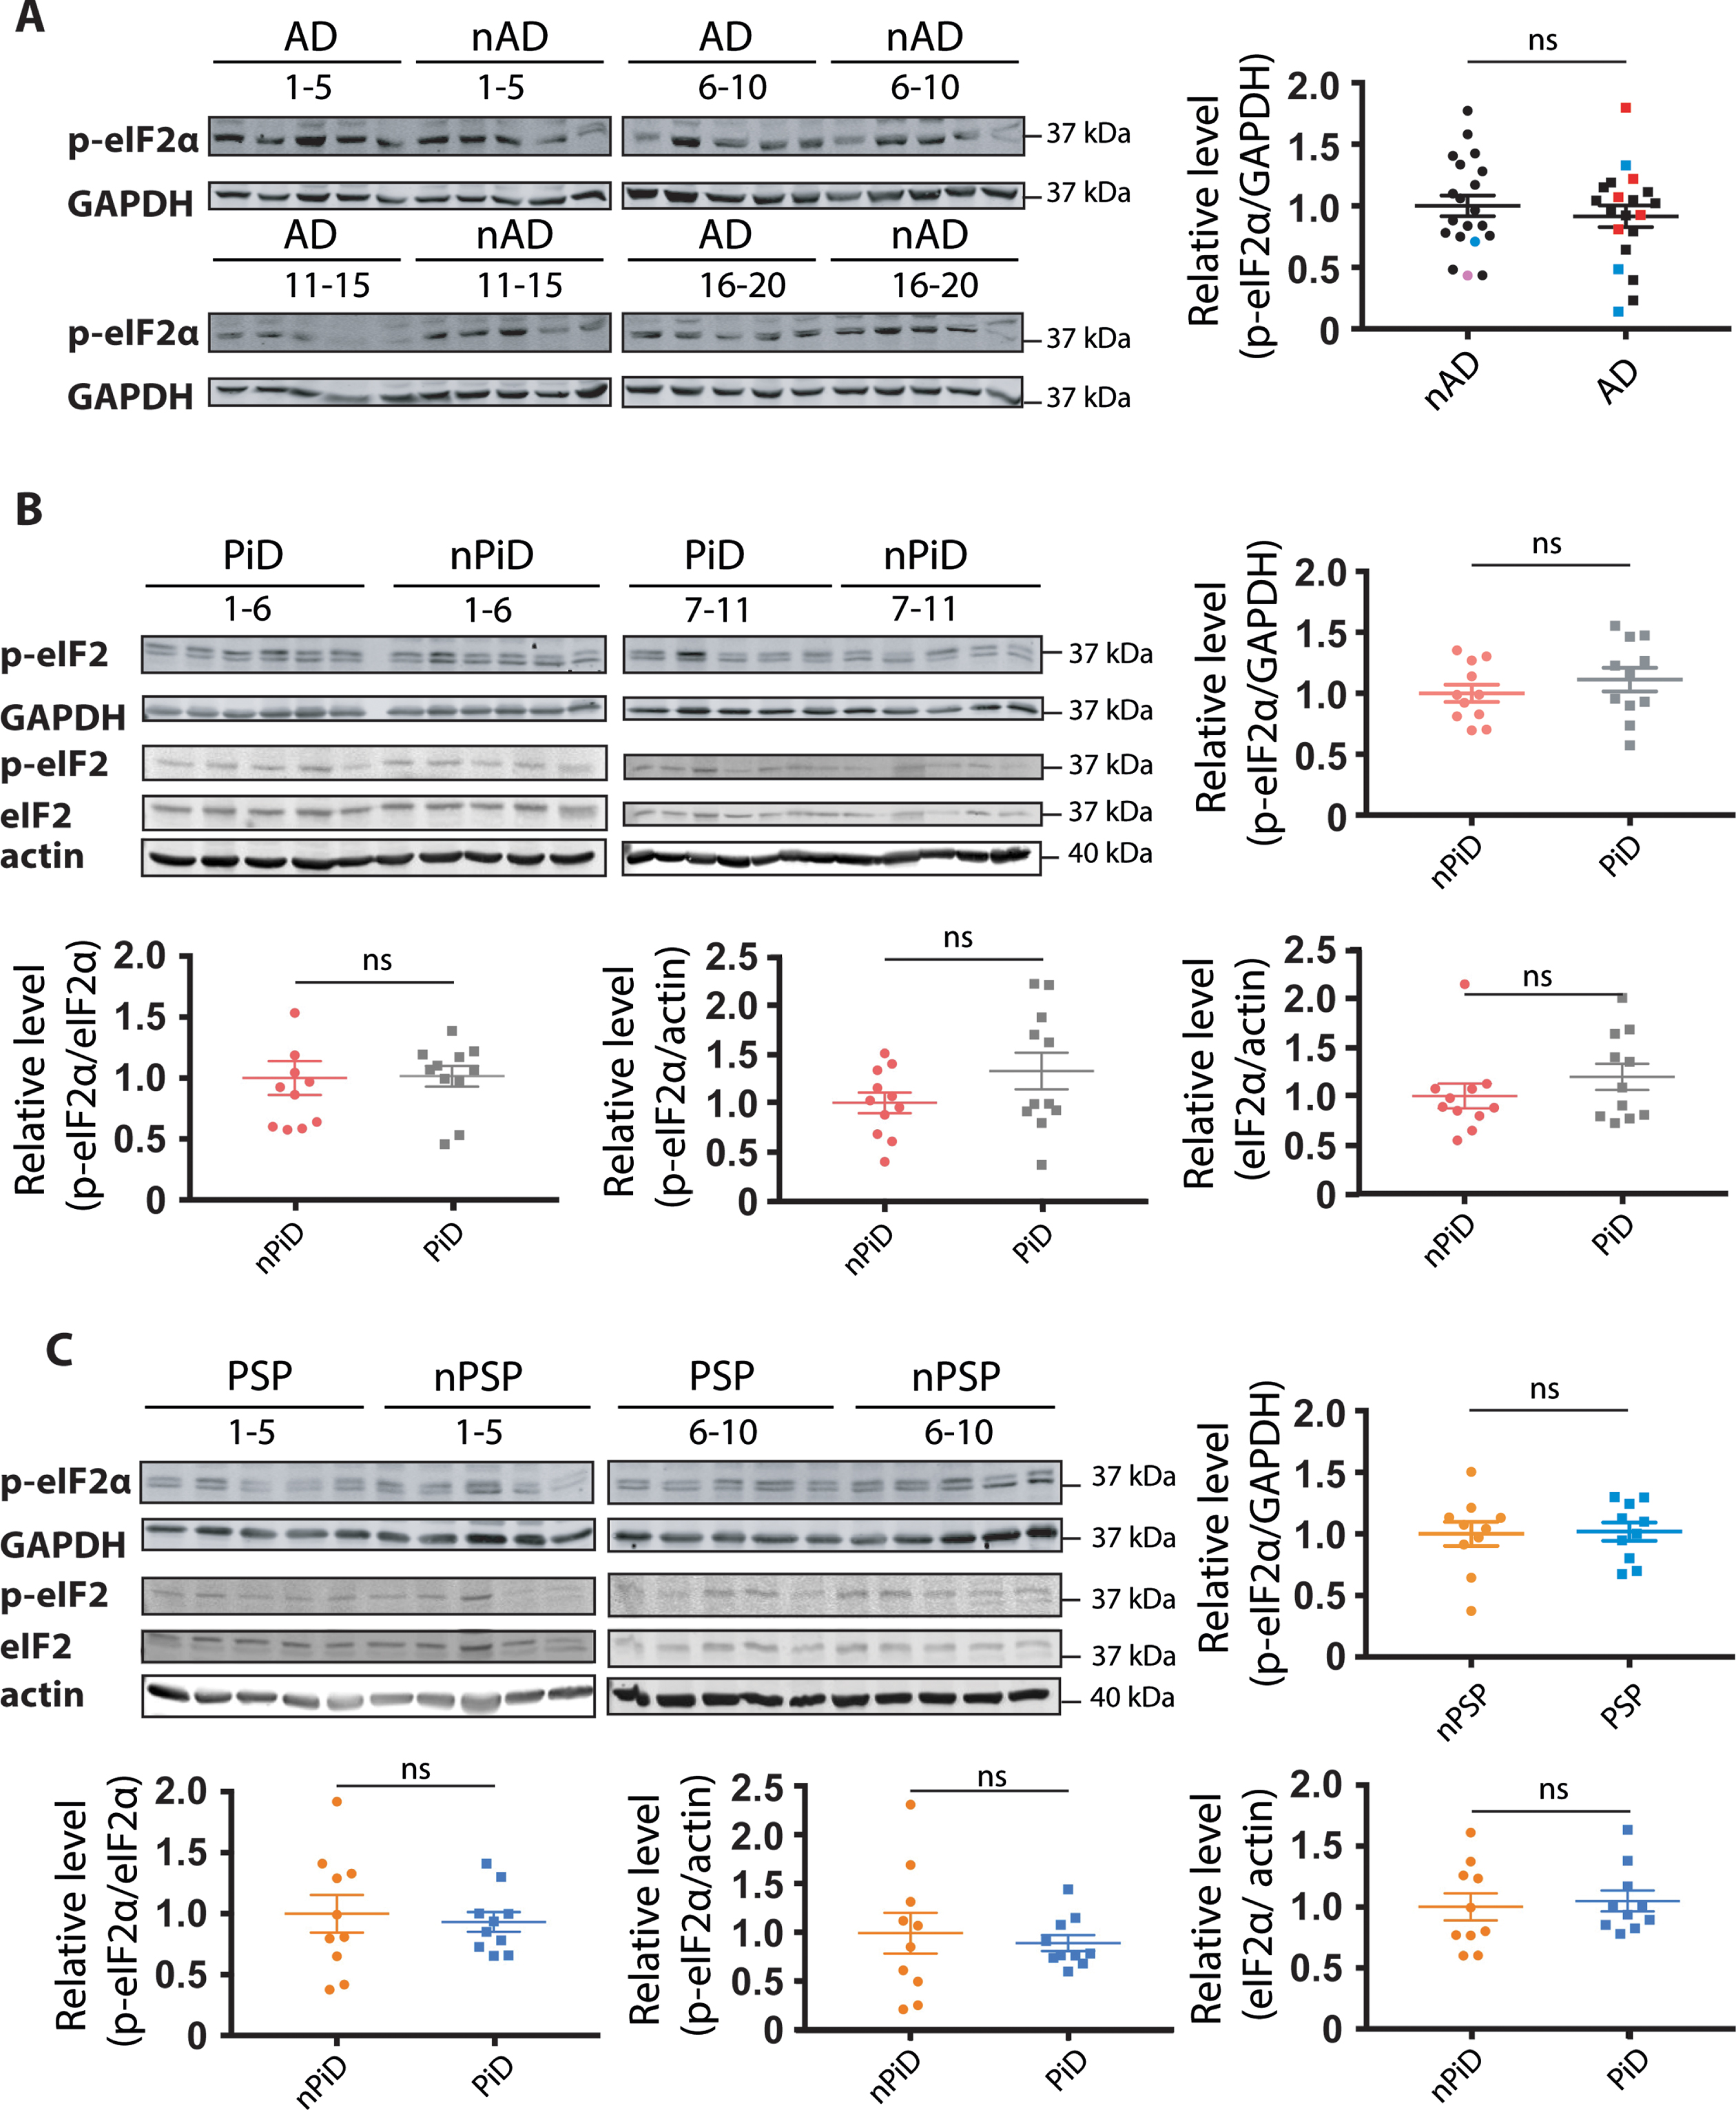 Detection of eIF2α phosphorylation in tauopathies and age-matched controls. p-eIF2α and GAPDH immunoreactivity for (A) AD, (B) PiD, and (C) PSP together with relative age-matched non-demented controls. Quantification of p-eIF2α immunoreactivity from individual samples was normalized to the immunoreactivity of a loading control, GAPDH. Data were analyzed using a two-tailed unpaired t-test revealing no significant differences (p = 0.4892, t = 0.6983; p = 0.3604, t = 0.9362; p = 0.8813, t = 0.1514 for AD, PiD, and PSP, respectively). (B, C) p-eIF2α, eIF2α, and actin immunoreactivity for (B) PiD and (C) PSP. Quantification revealed no significant difference when normalizing p-eIF2α over eIF2α (p = 0.3653, U = 46; p = 0.5288, U = 41 for PiD, PSP), p-eIF2α over actin (p = 0.8977, U = 58; p = 0.5607, t = 0.5927 for PiD, PSP) or eIF2α over actin (p = 0.6522, U = 53 p = 0.9705, U = 49 for PiD, PSP). Shown are means, error bars show SEM. ns, not significant. Number of cases: ND = 20, AD = 20, nPiD = 11, PiD = 11, nPSP = 10, PSP = 10. Each lane corresponds to one individual case. Colored symbols in (A) correspond to individuals with LBD co-morbidity (red), APOE 4.4 genotype (blue), and CVD co-morbidity (magenta).